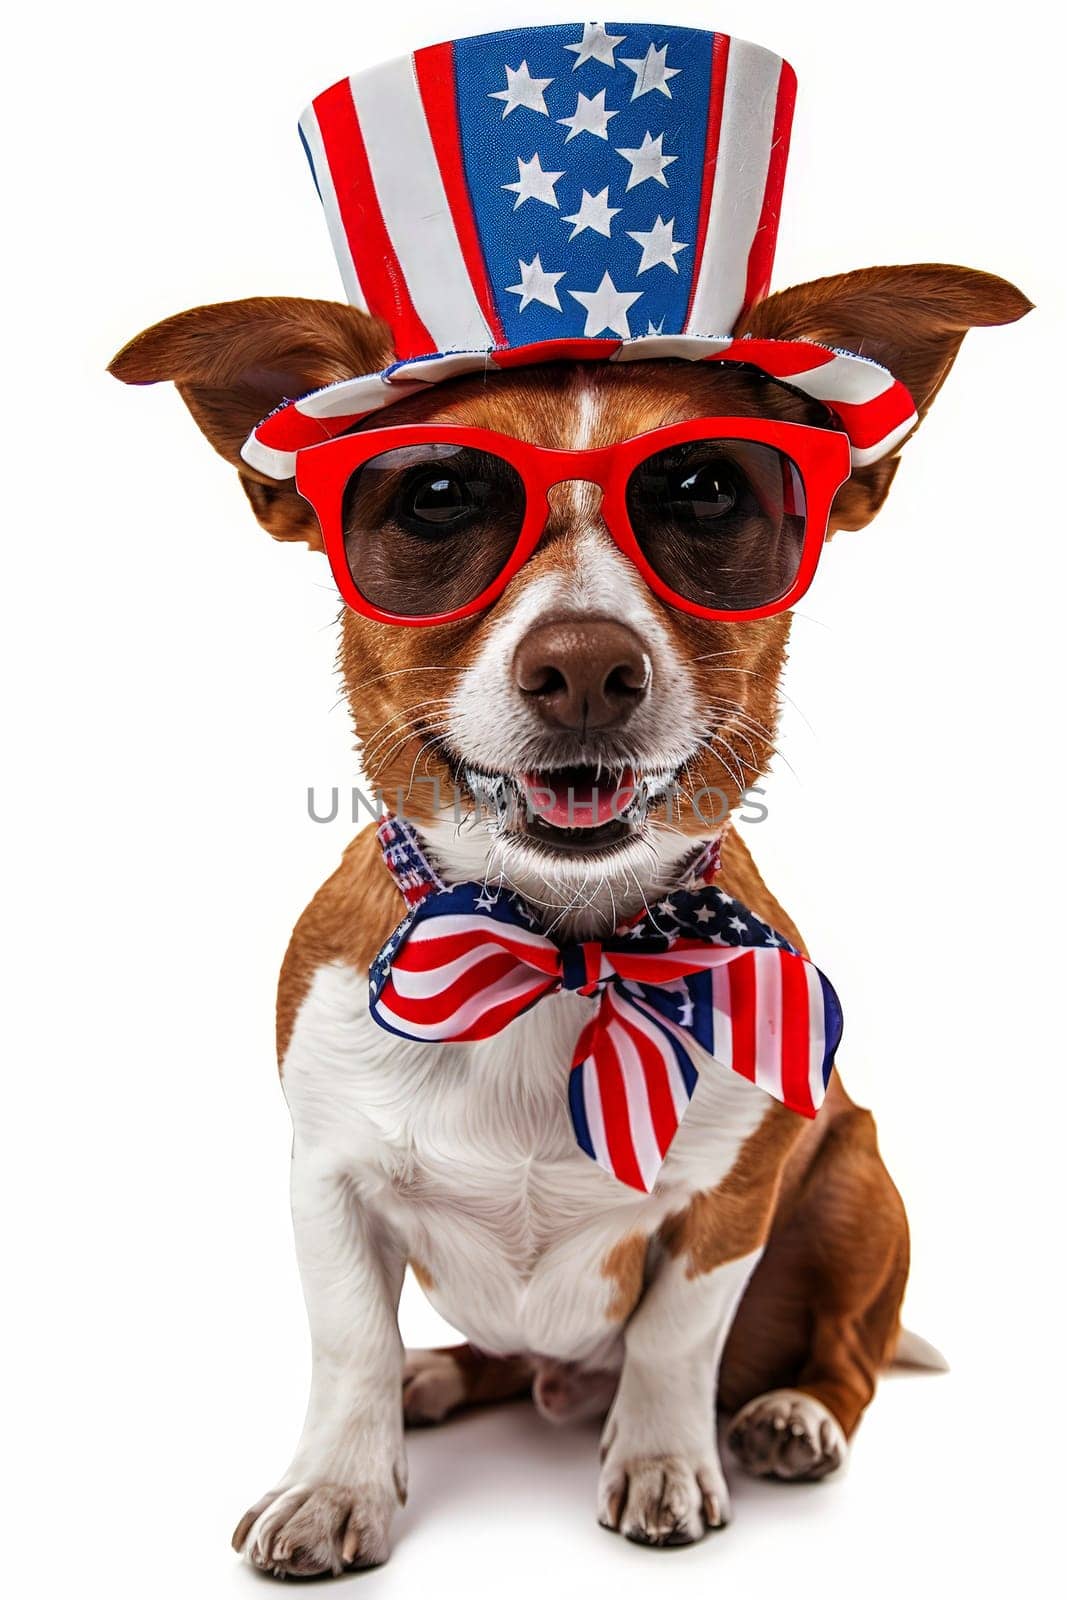 A Russell dog wearing a USA top hat and sunglasses. independence day concept by matamnad